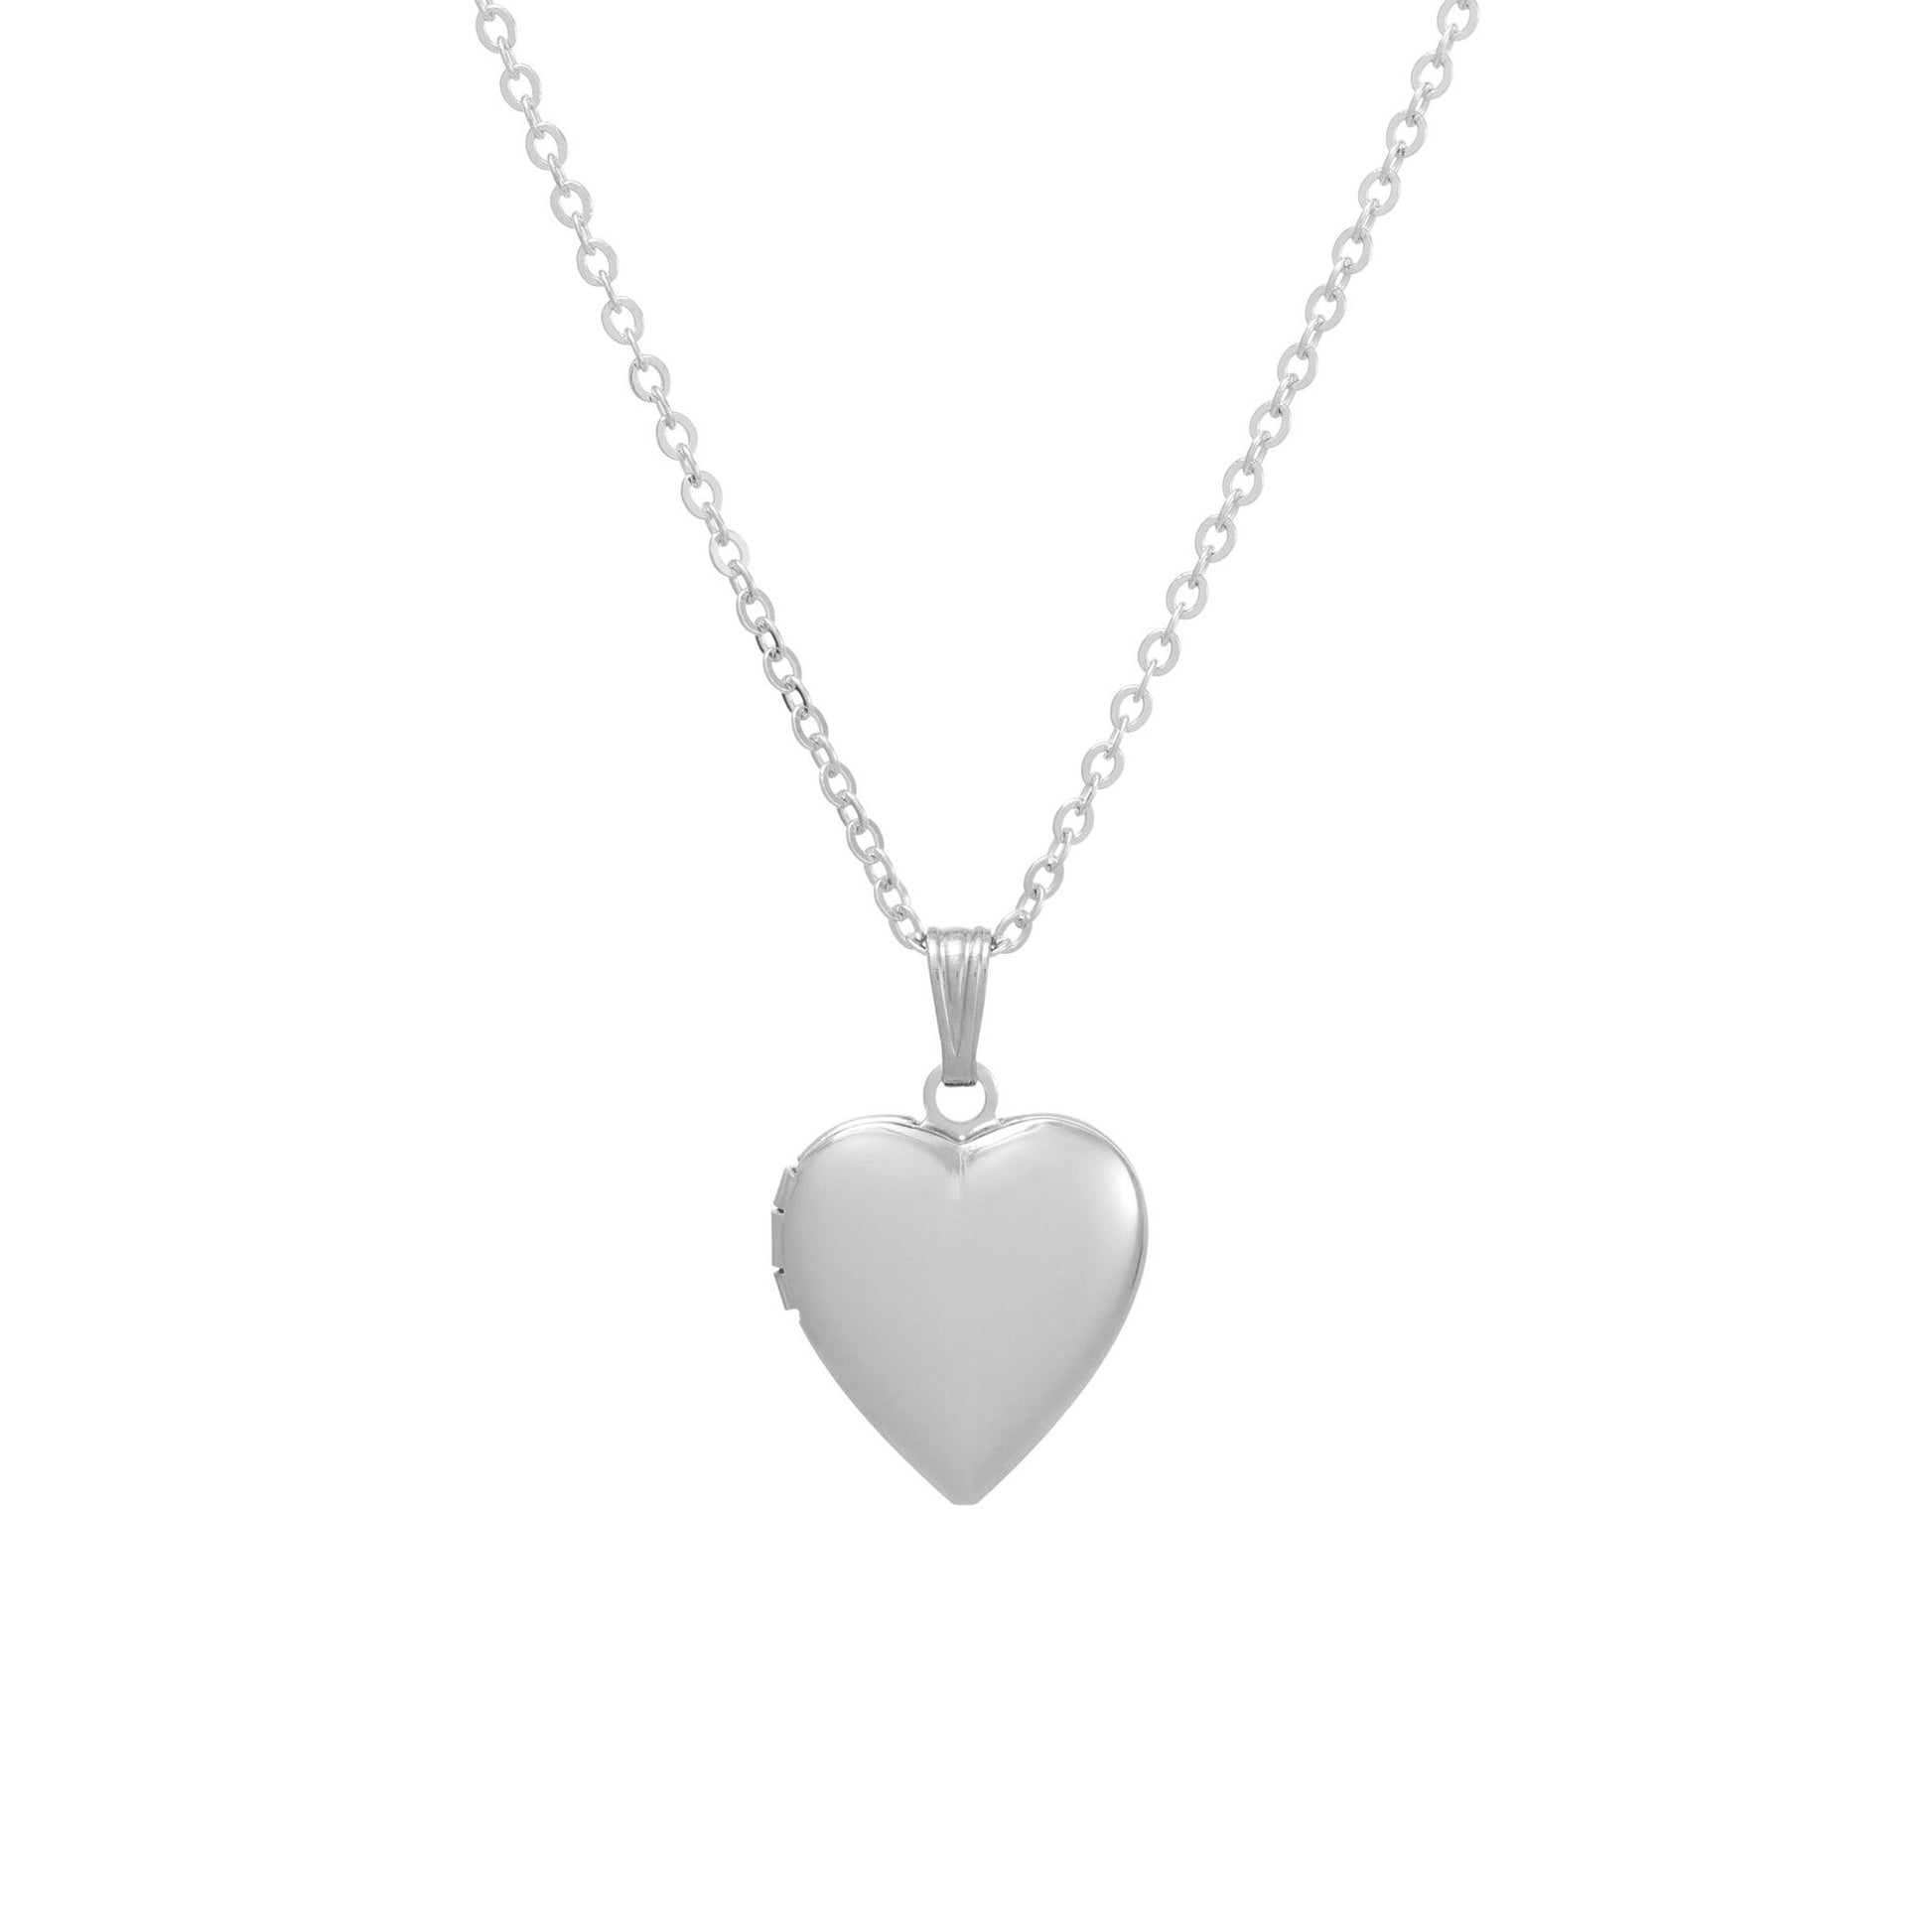 A classic locket necklace displayed on a neutral white background.